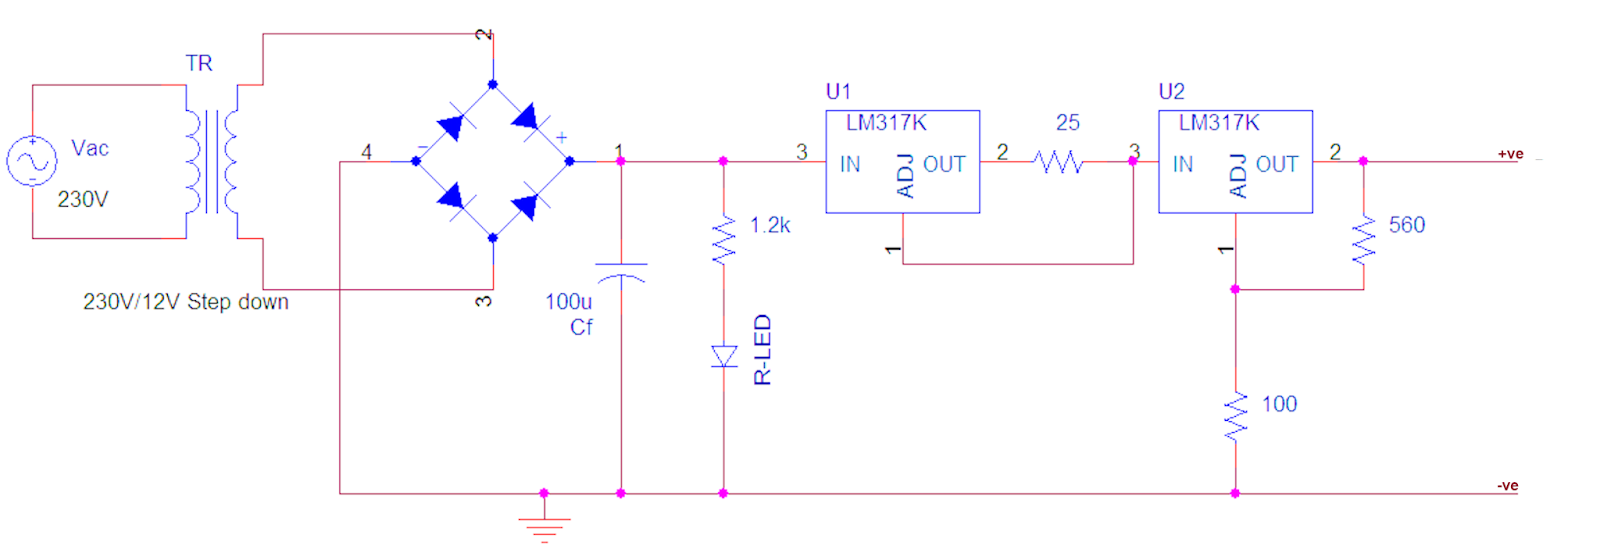 NiCad Charger Circuit